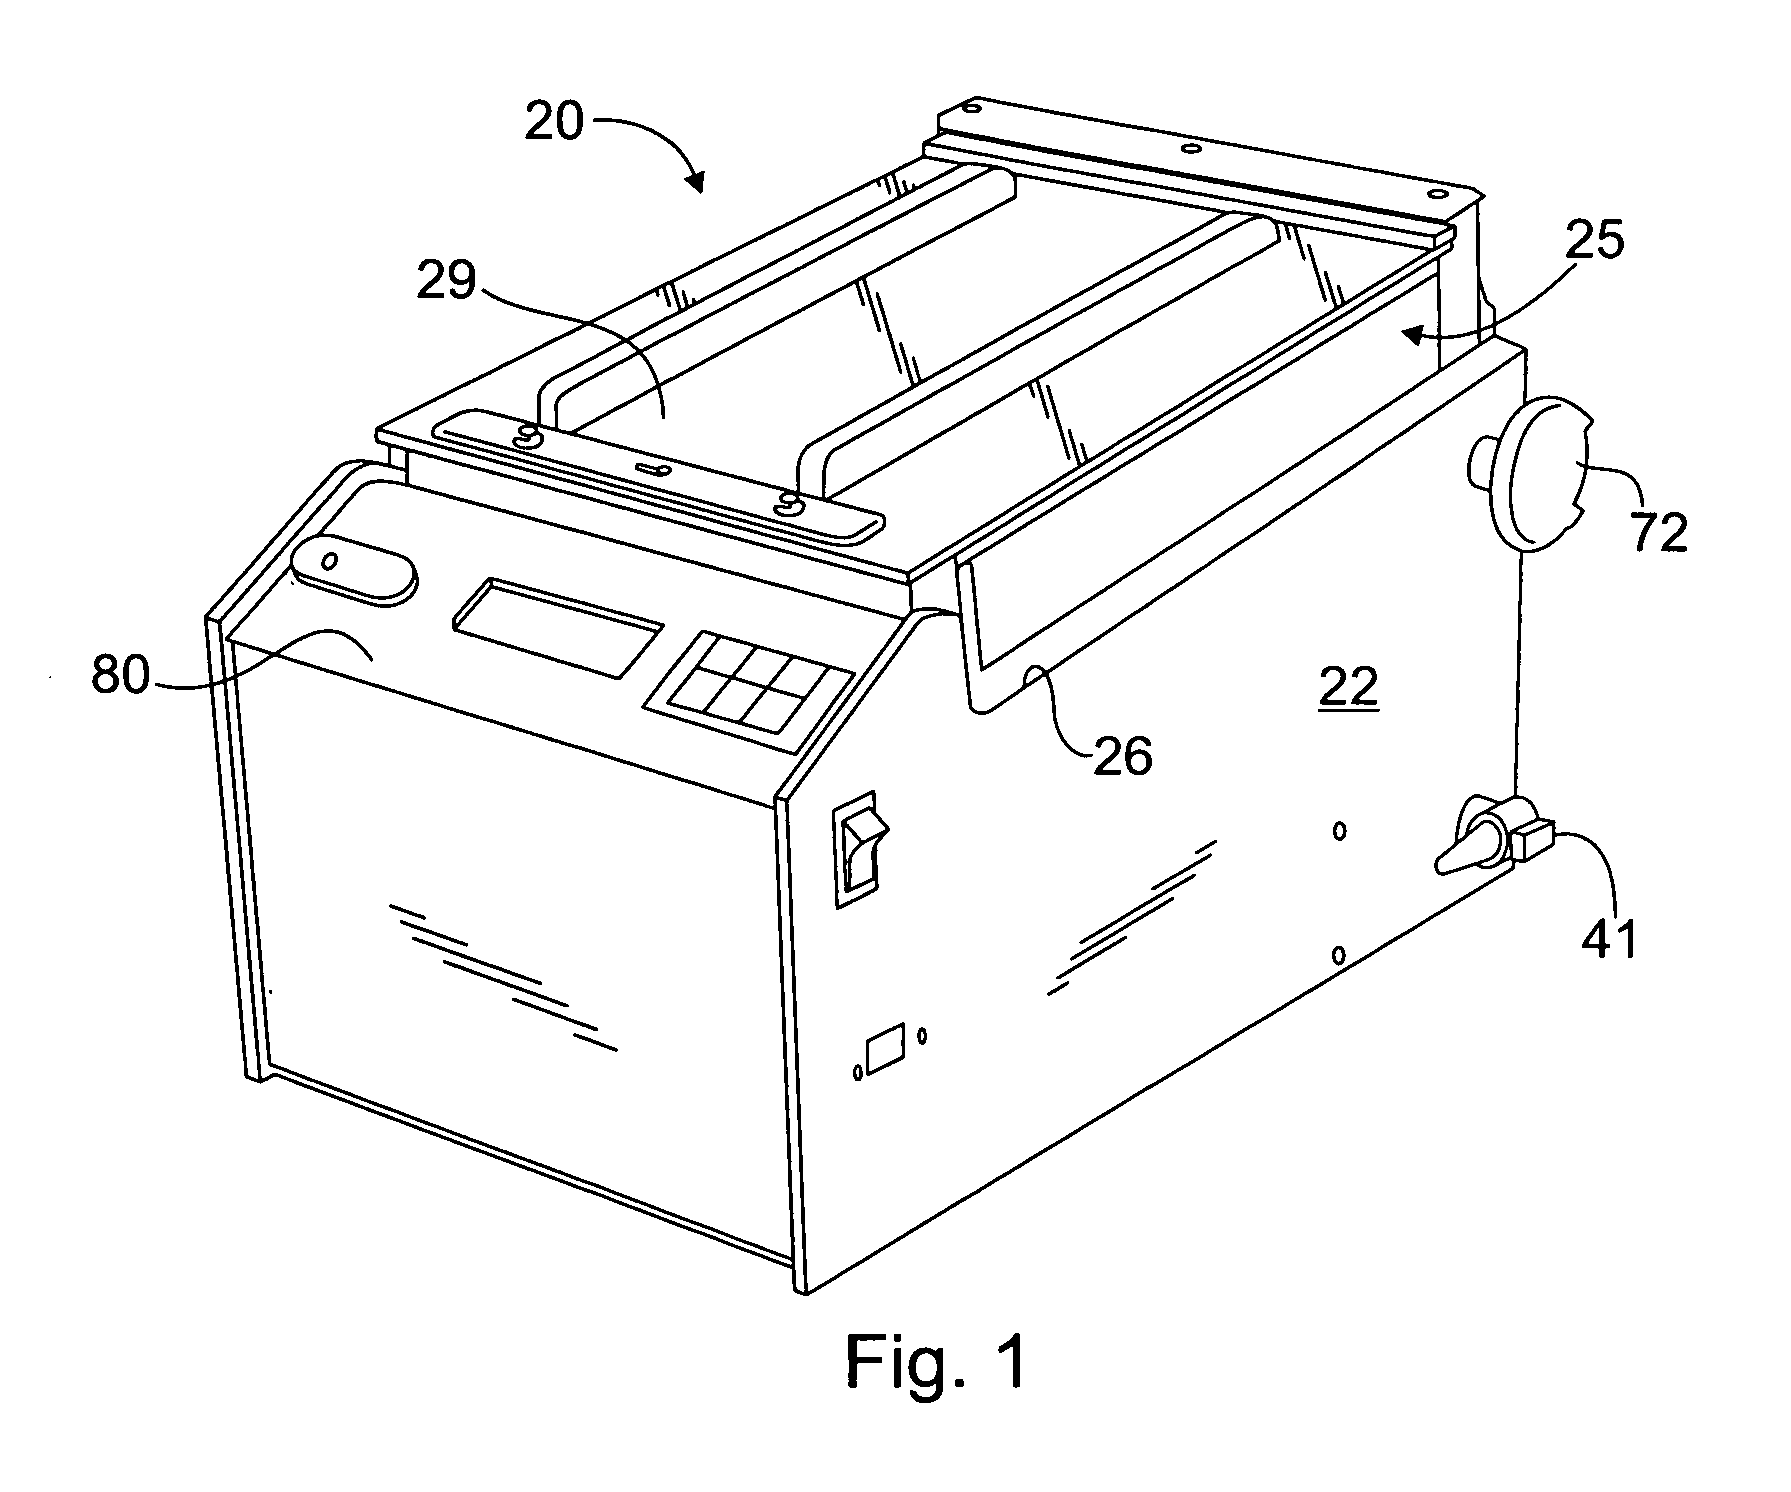 Apparatus and method for thawing biological materials